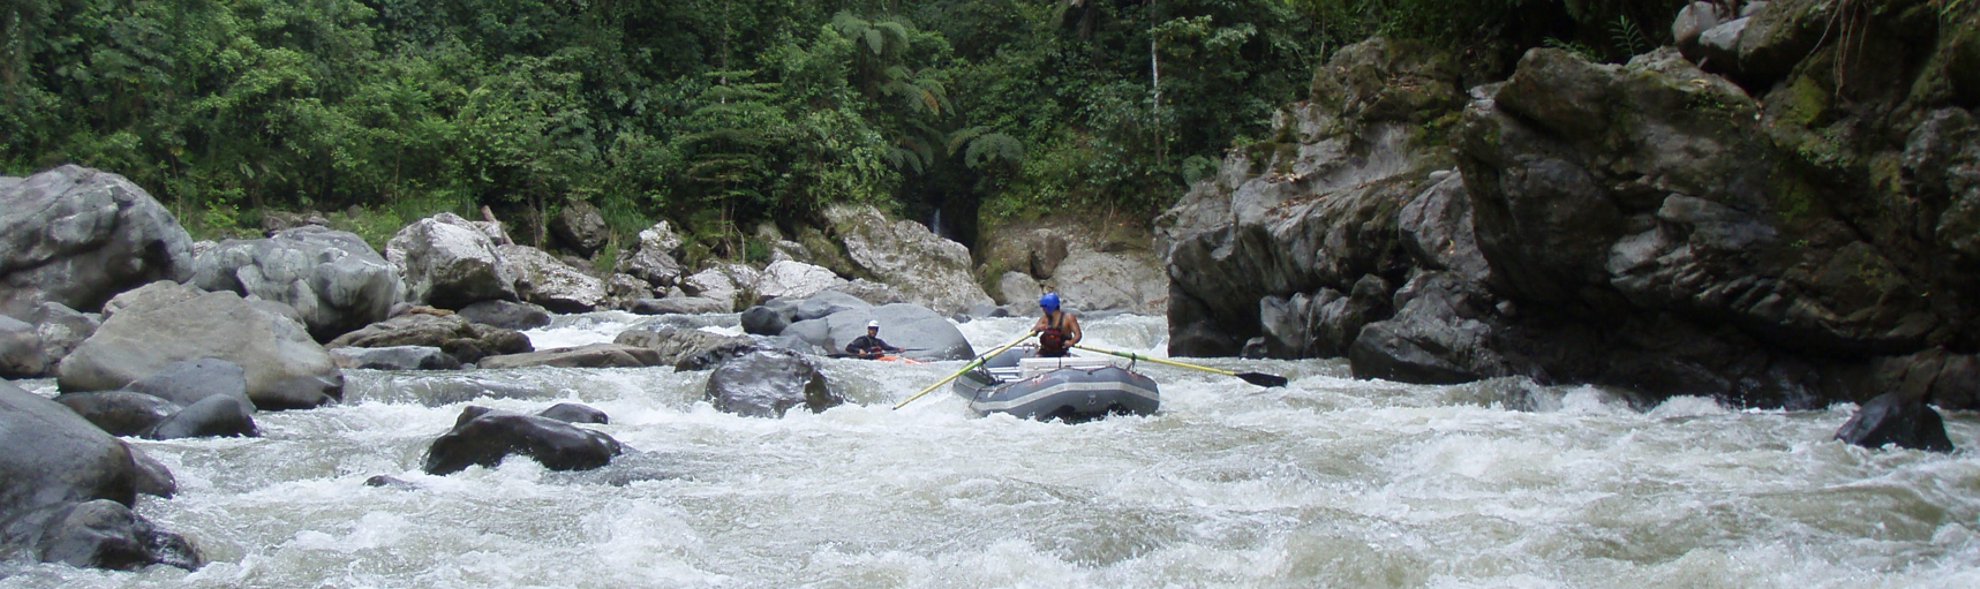 Rafting Pacuare River - Safety sayaker and Oar Boat